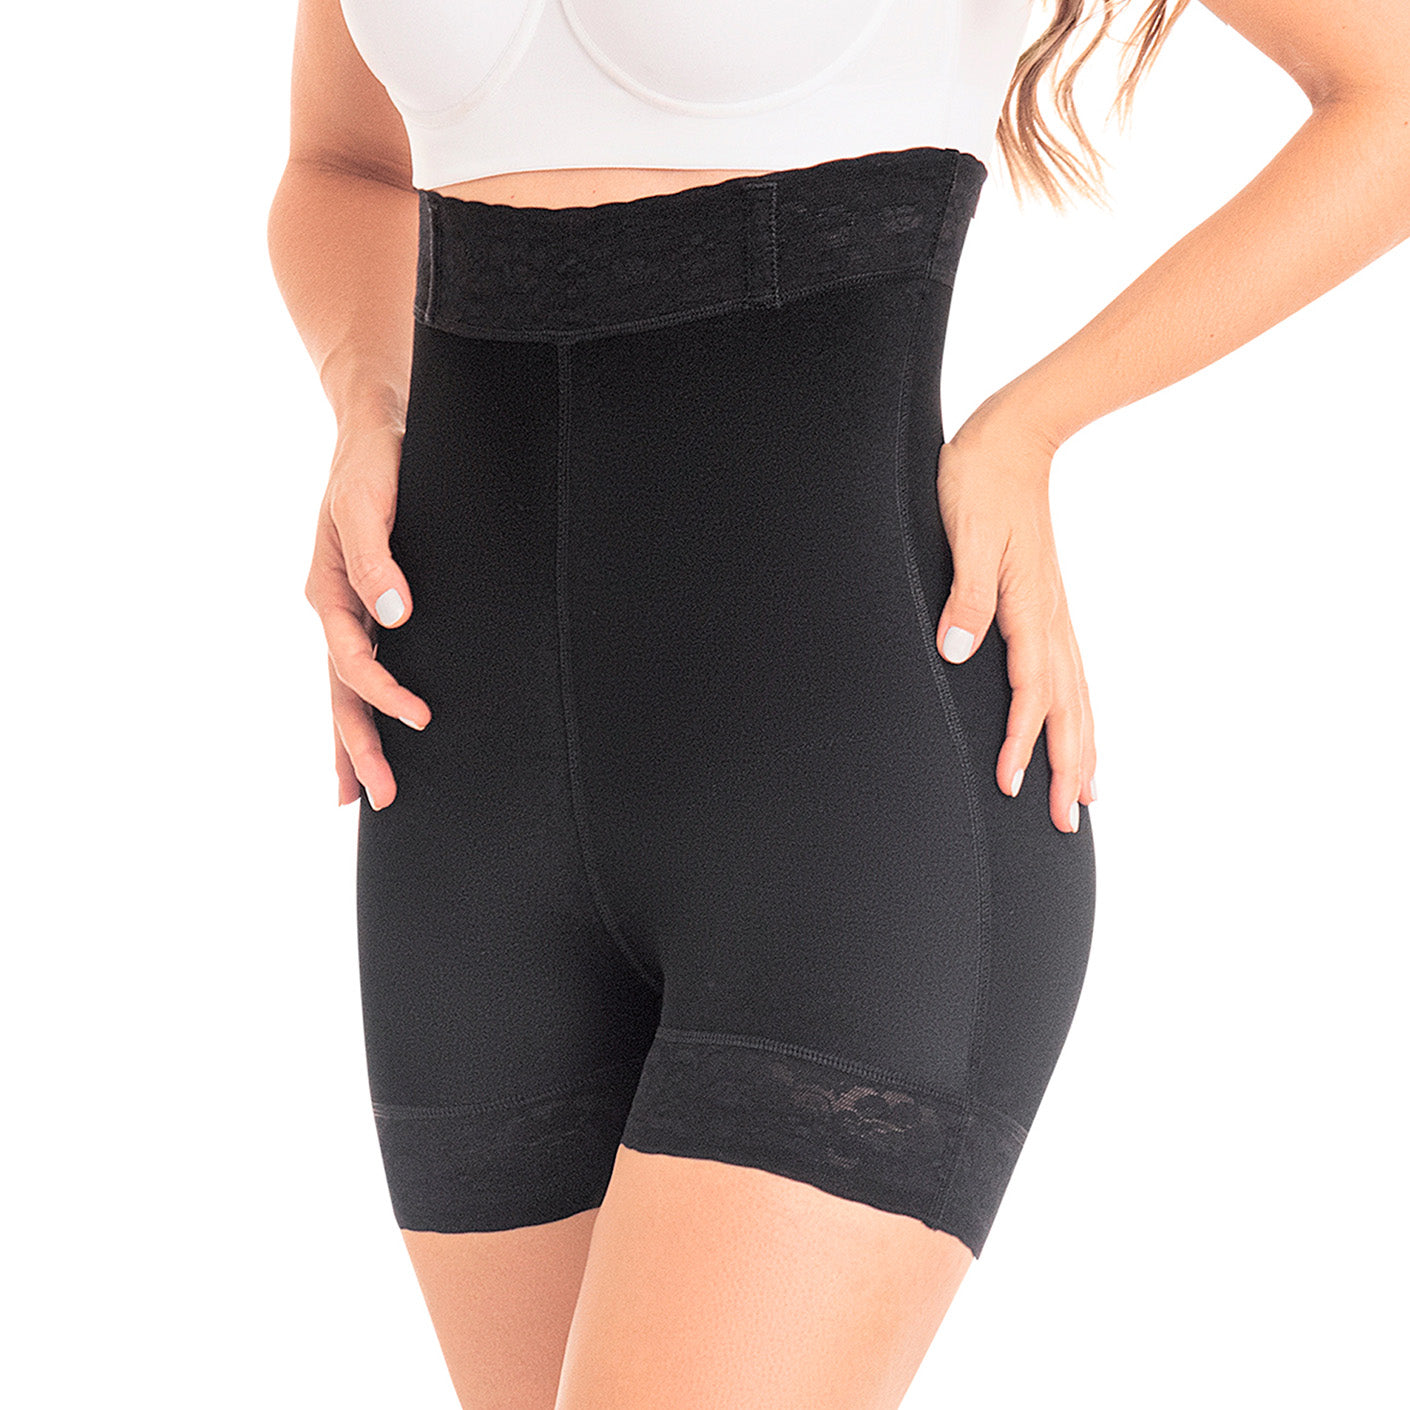 Tummy Flatting & Butt enhancing High Waist Compression Shorts. Microfiber  Shape Wear. For Slimmer Look & After Cosmetic Surgery. Post-Op Garments.  Fine Italian Made Quality & Style(XXLrg Black) 